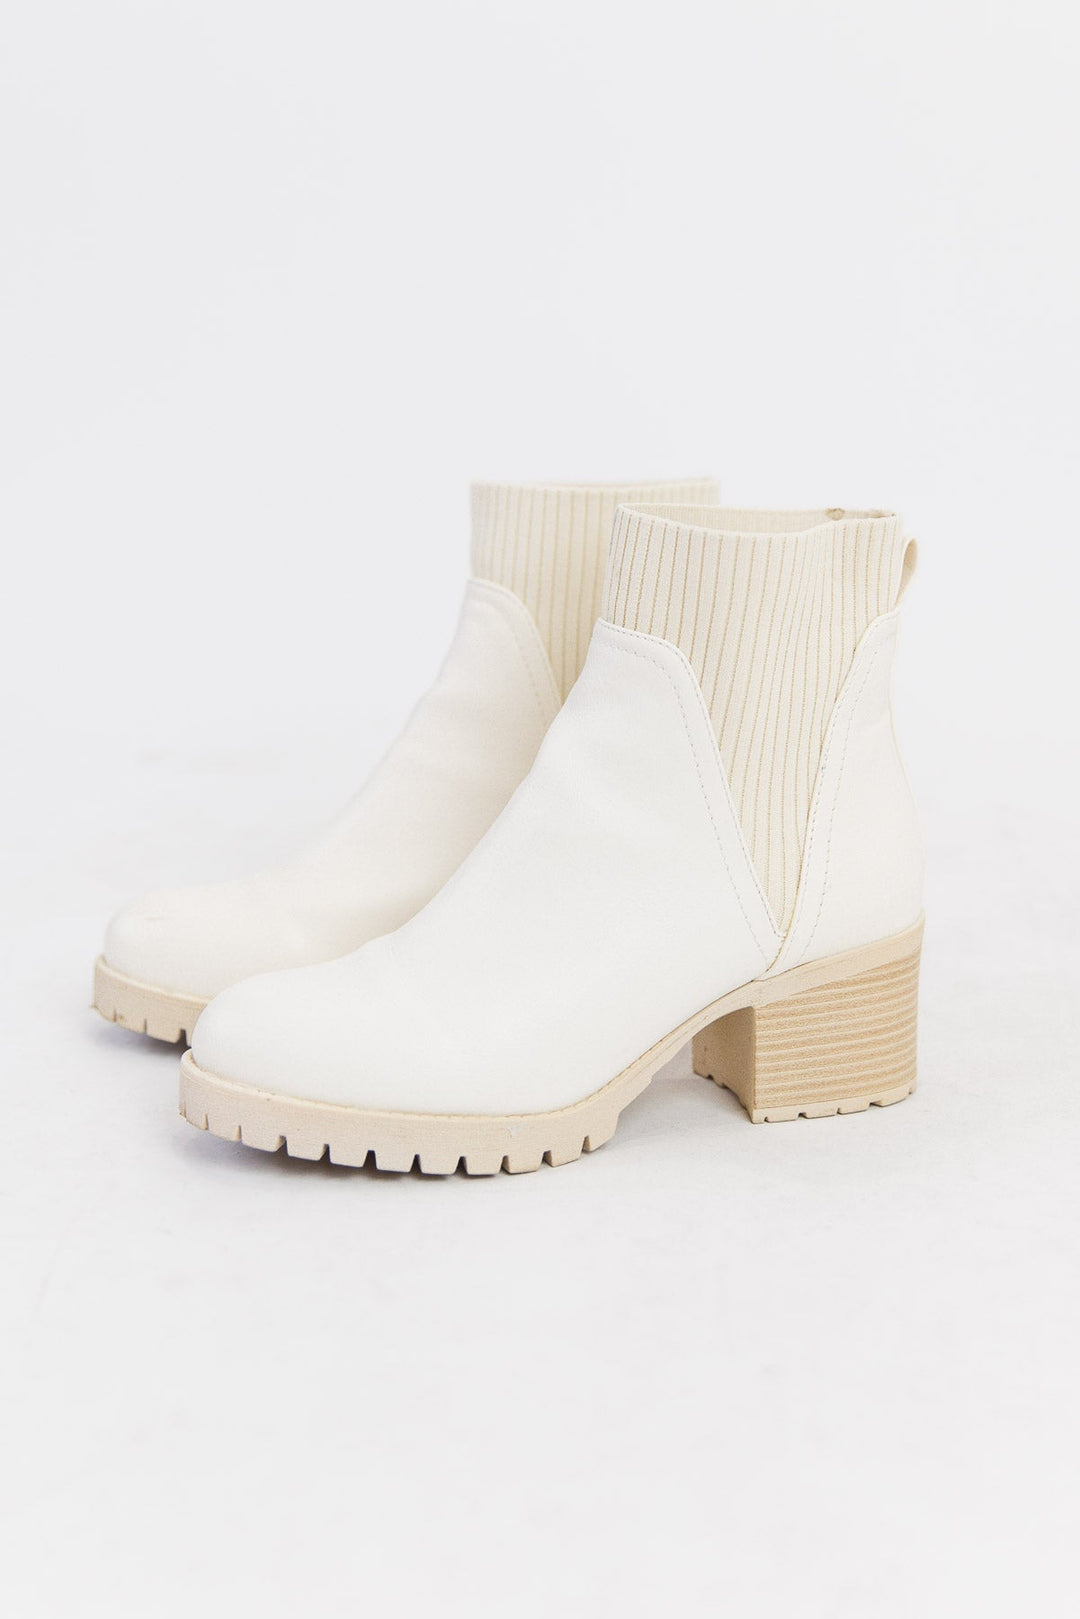 Stepped Up Style Cream Boots - Final Sale